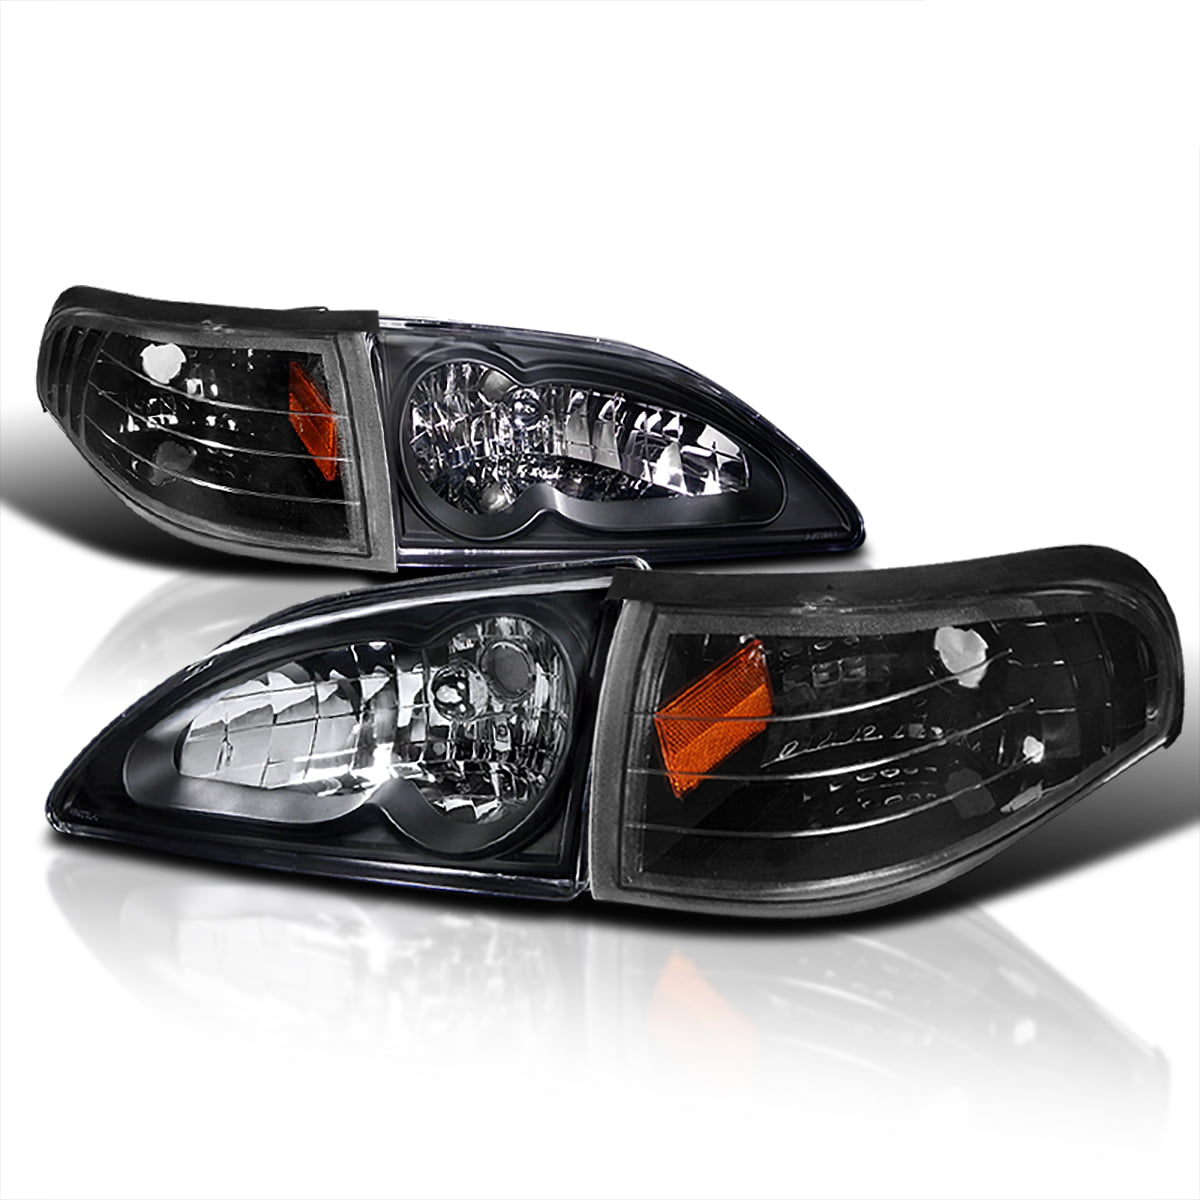 Spec-D Tuning Black Housing Clear Lens Corner Lights for 1994-1998 Ford Mustang Parking Signal Lamps Assembly Left Right Pair 